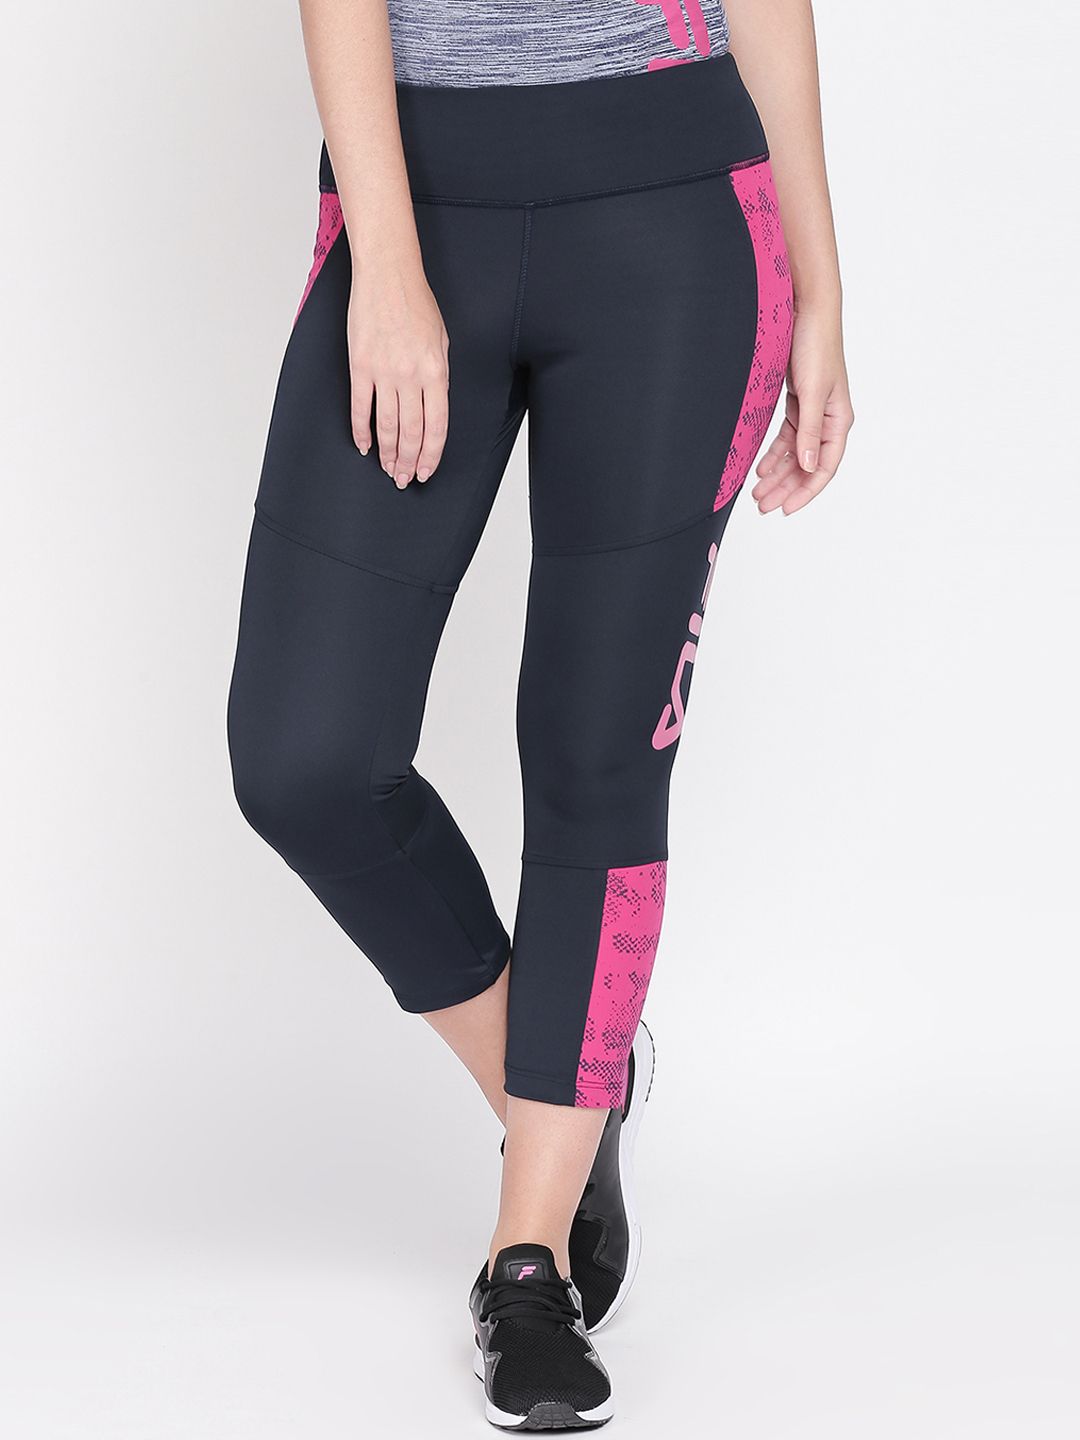 FILA Women Blue Solid Tights Price in India